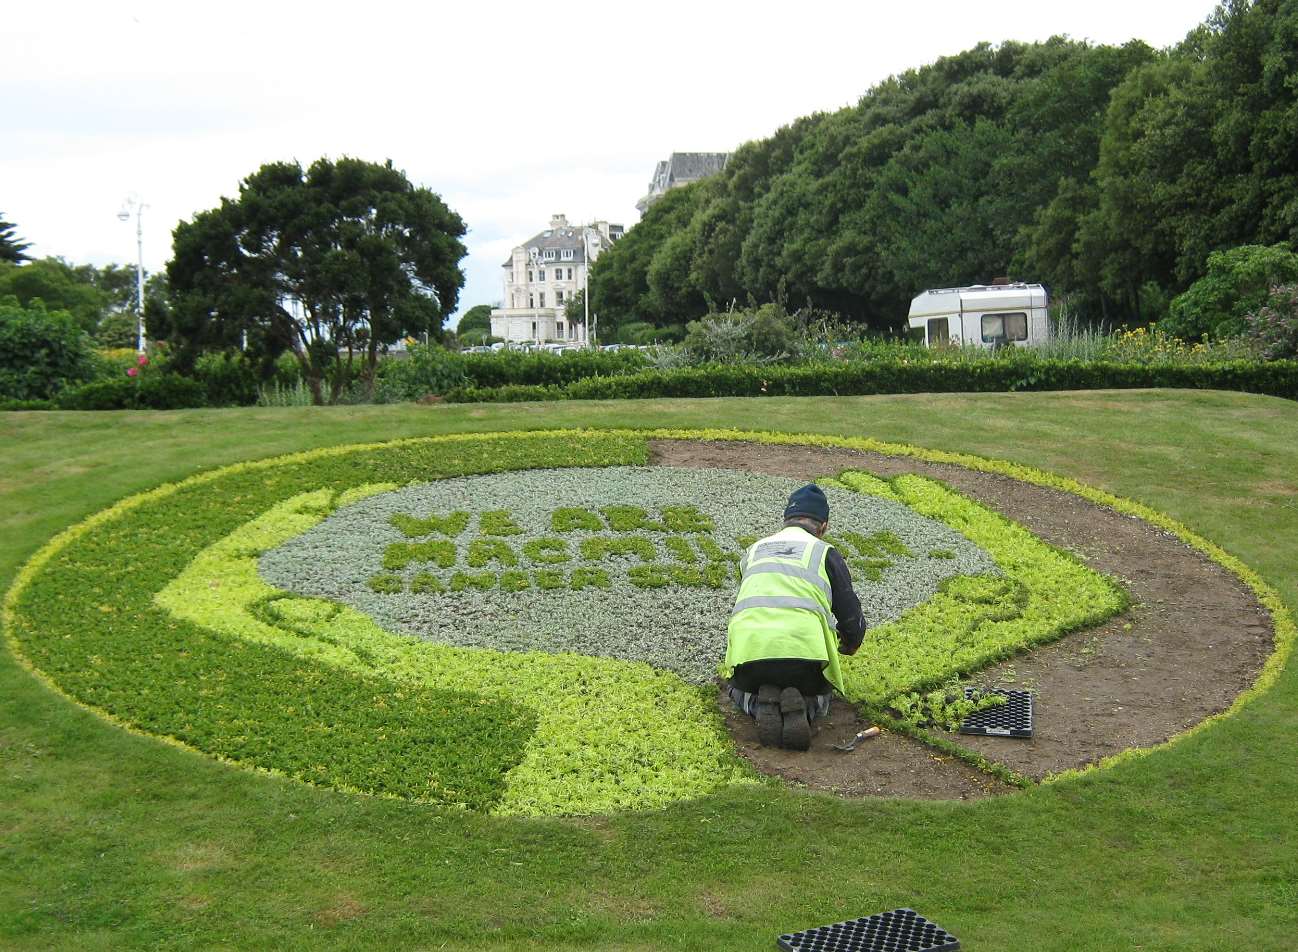 A Macmillan flower bed which was planted in 2011. It is part of an annual initiative to support charities.